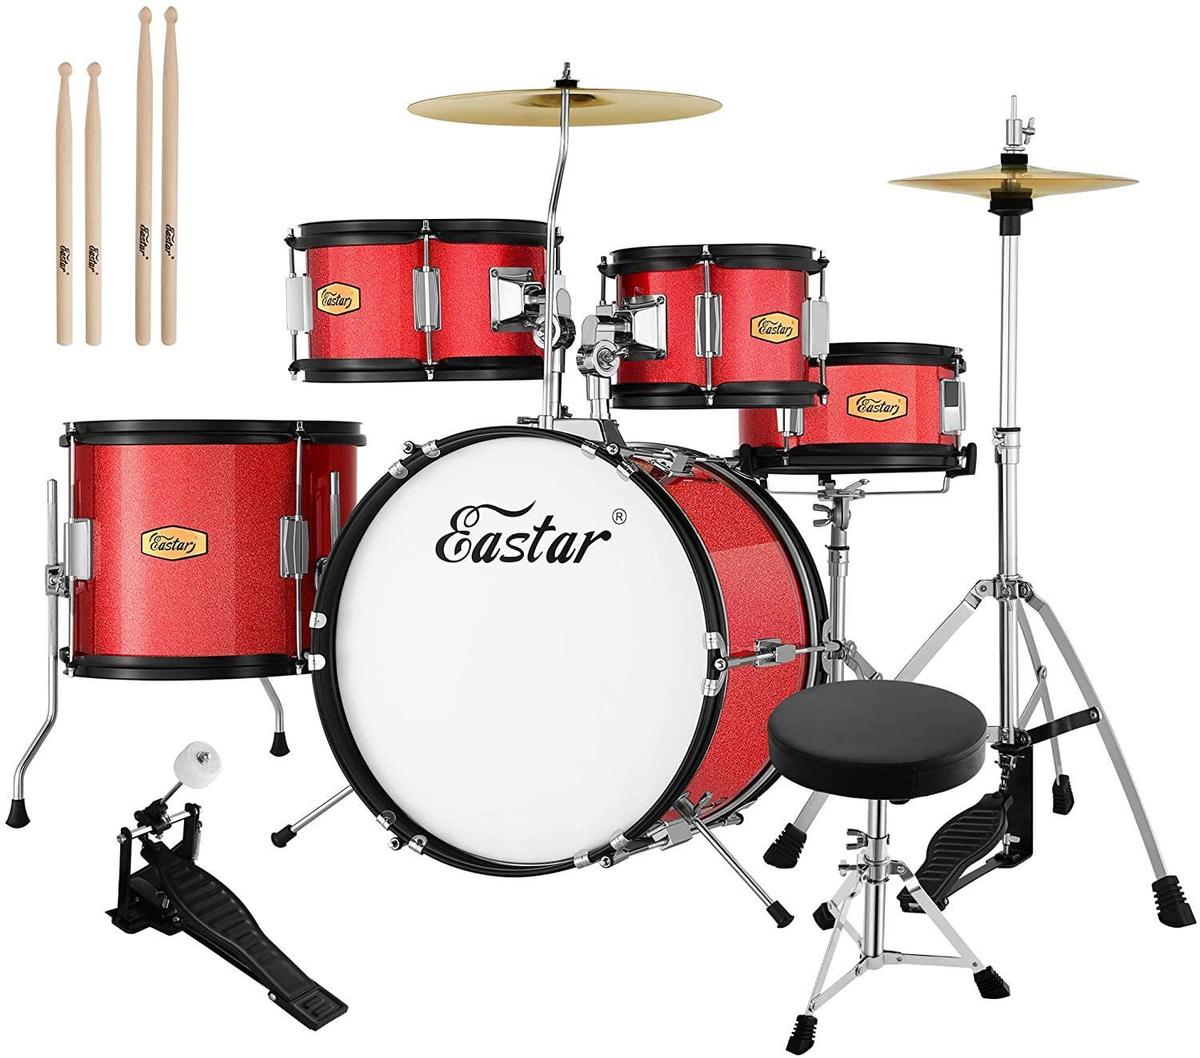 Eastar Kids Drum Set Junior Drum Set 16 inch, 5-Piece with Adjustable Throne and Cymbal $199.99 MSRP